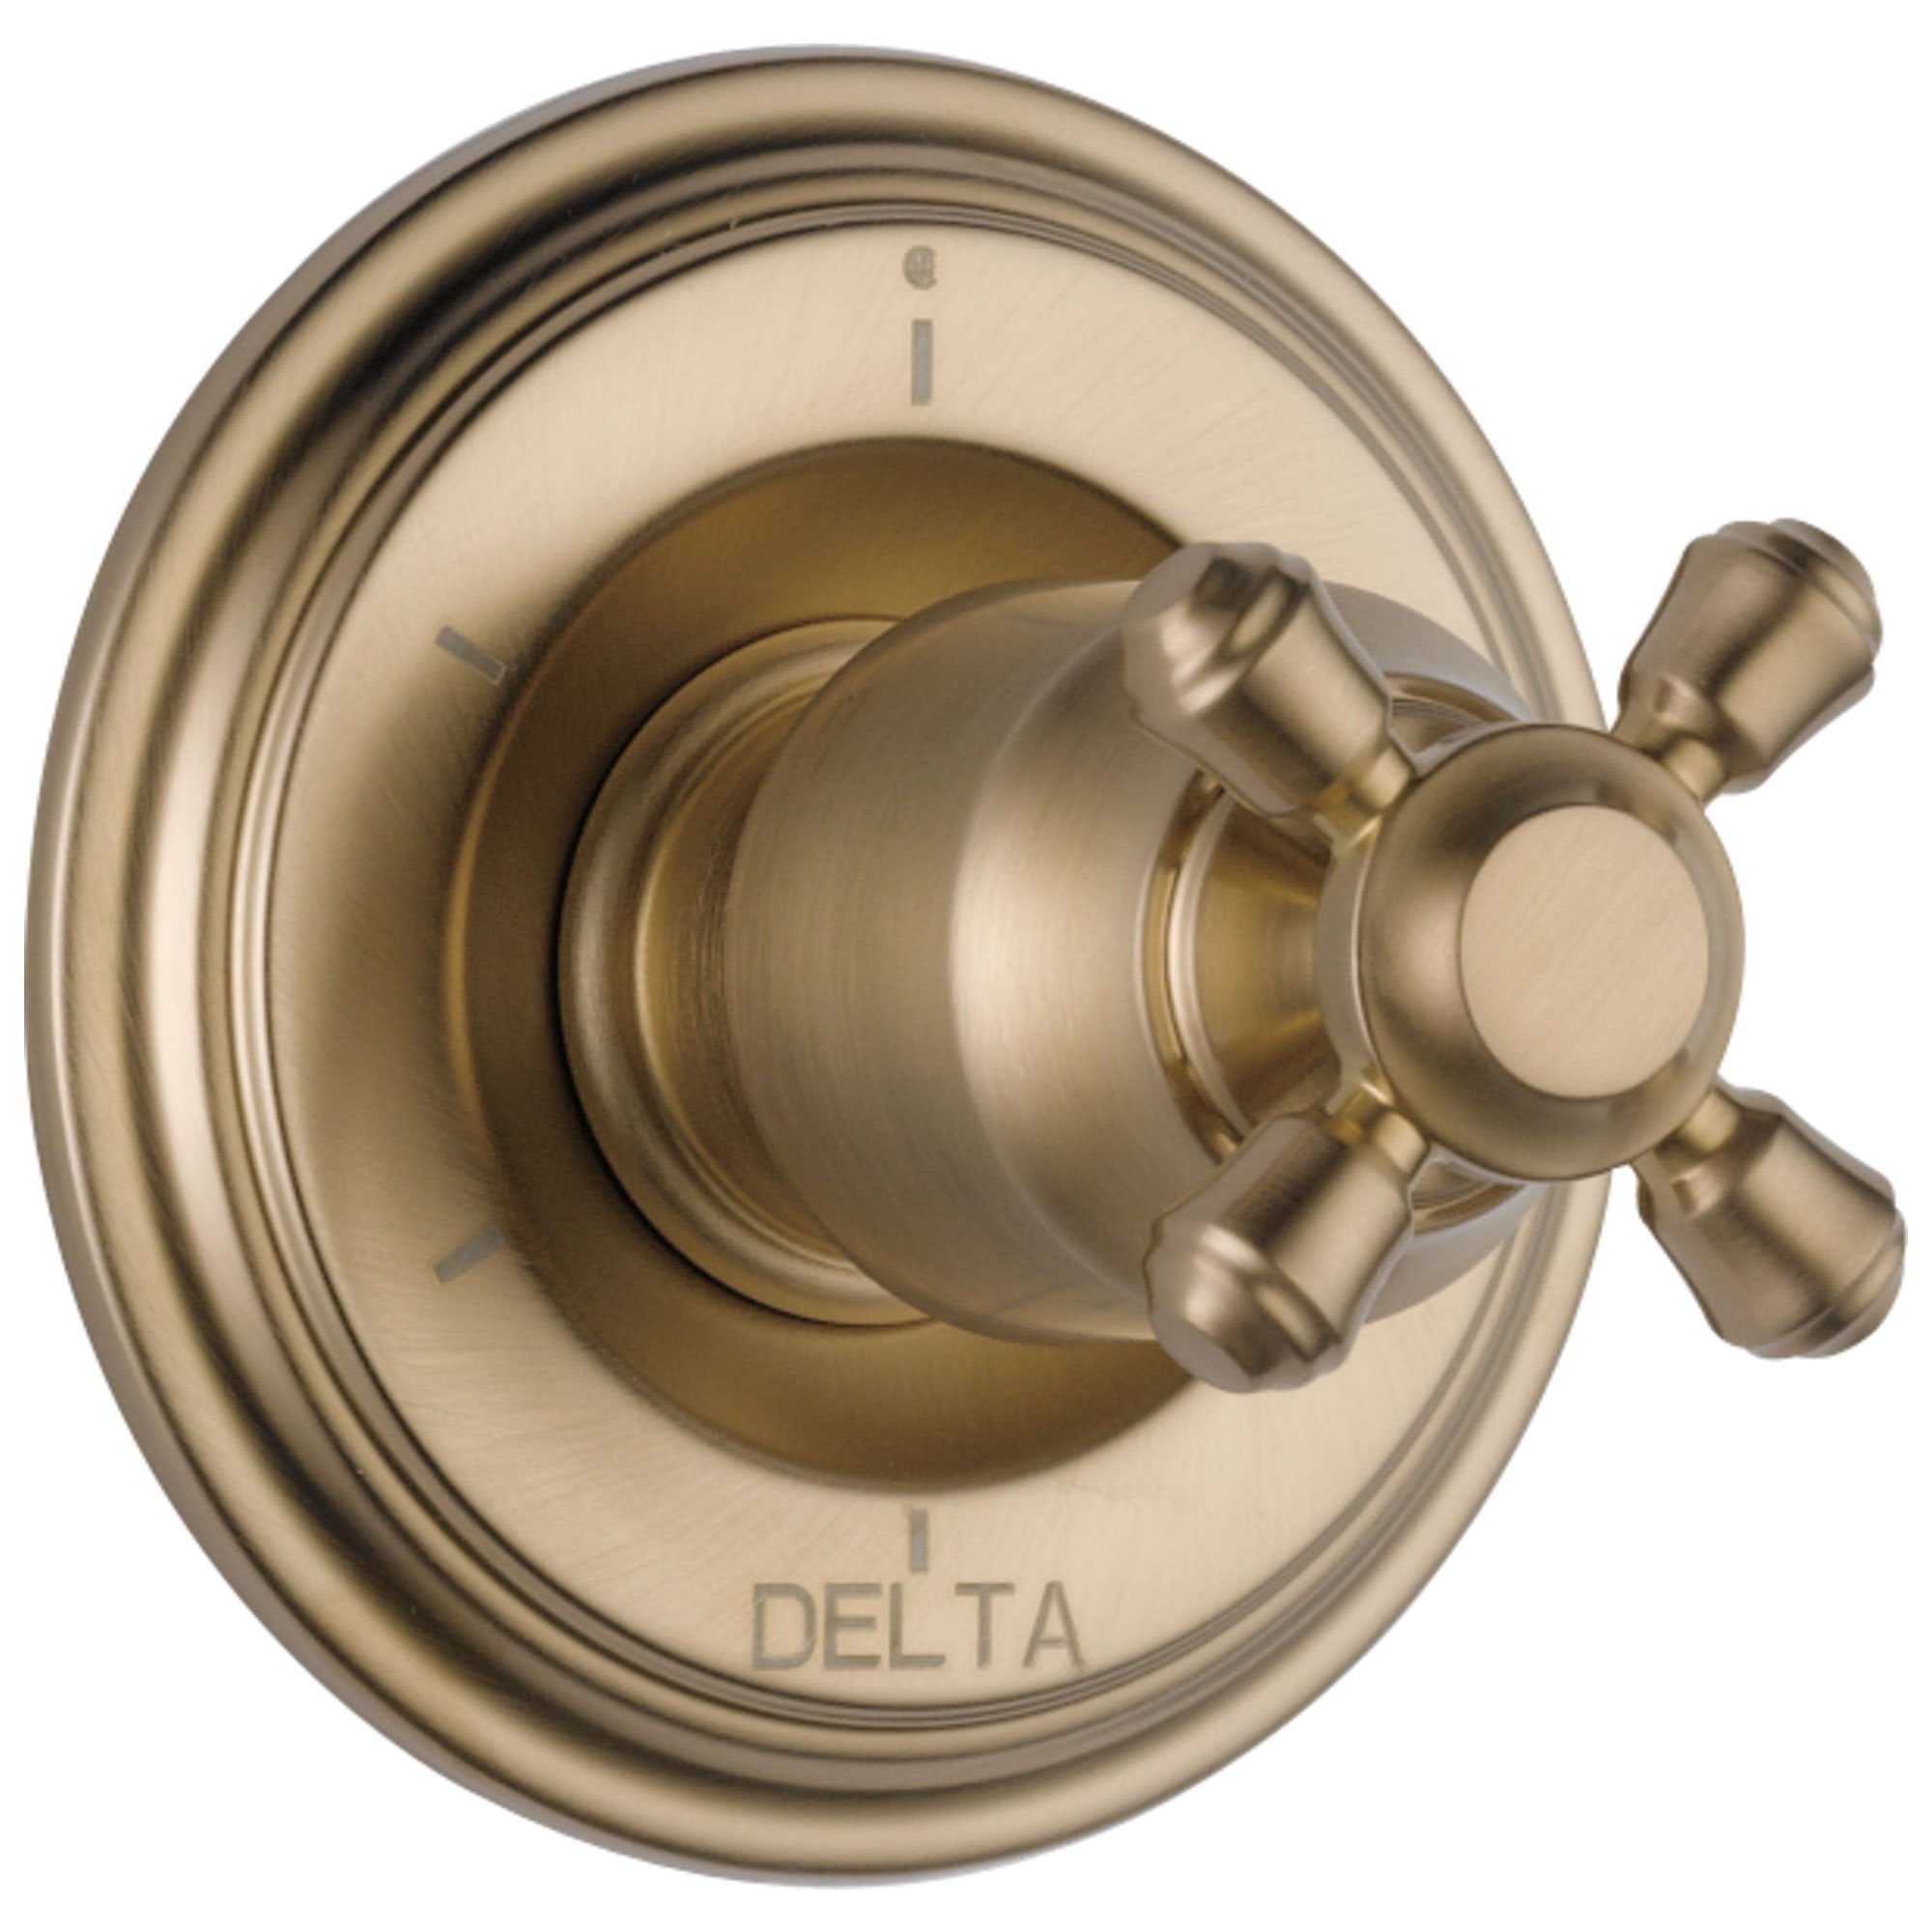 Delta Cassidy Collection Champagne Bronze Finish 6-Setting 3-Port Shower Diverter INCLUDES Cross Handle and Rough-in Valve D1893V